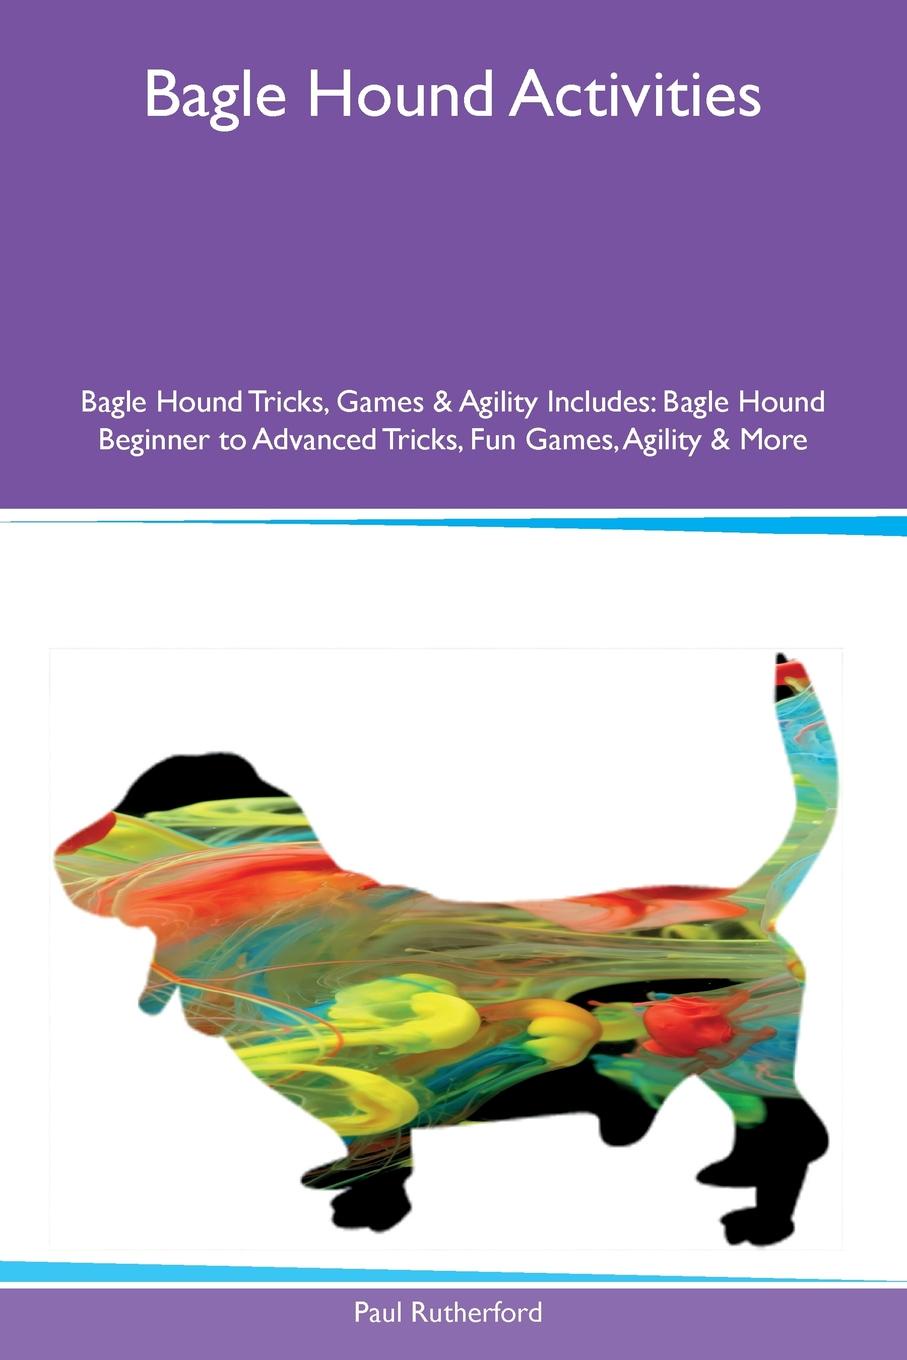 Bagle Hound Activities Bagle Hound Tricks, Games & Agility Includes. Bagle Hound Beginner to Advanced Tricks, Fun Games, Agility & More